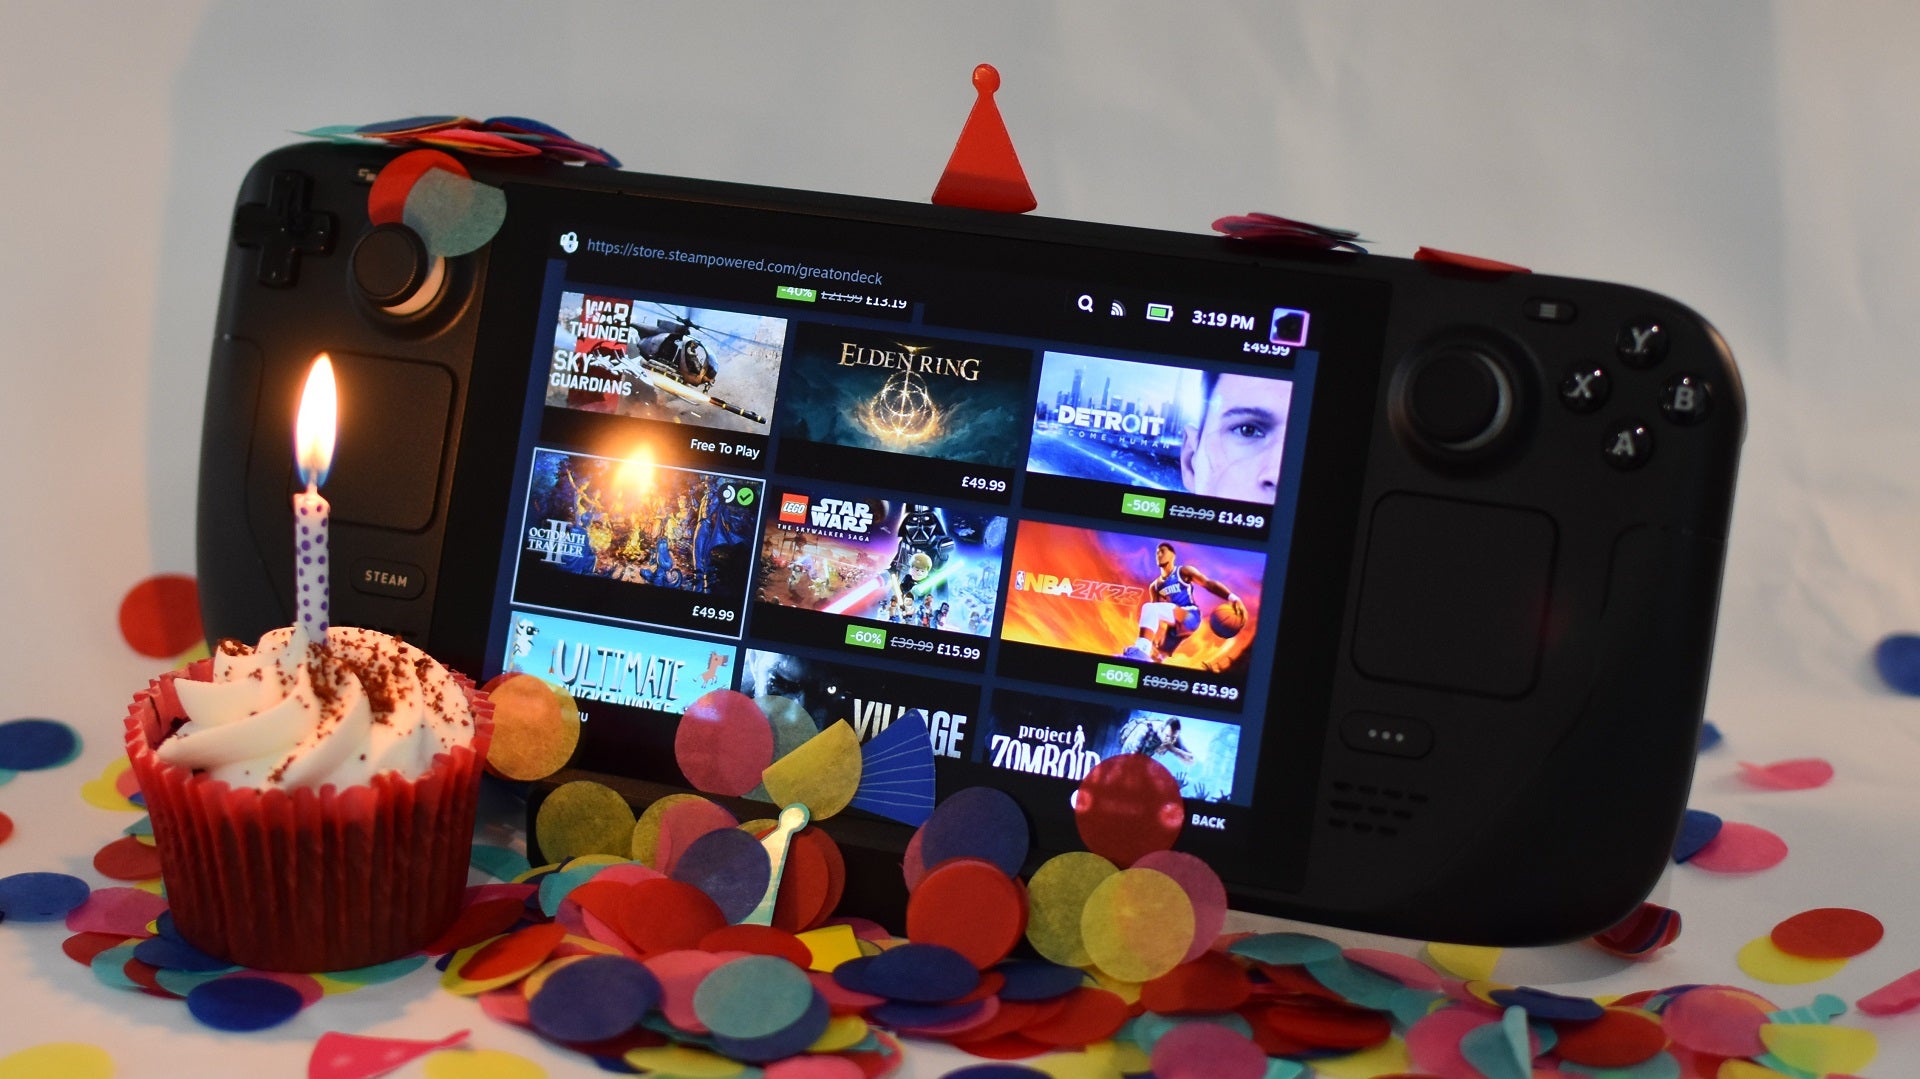 A Steam Deck surrounded by confetti and a cupcake with a lit birthday candle.